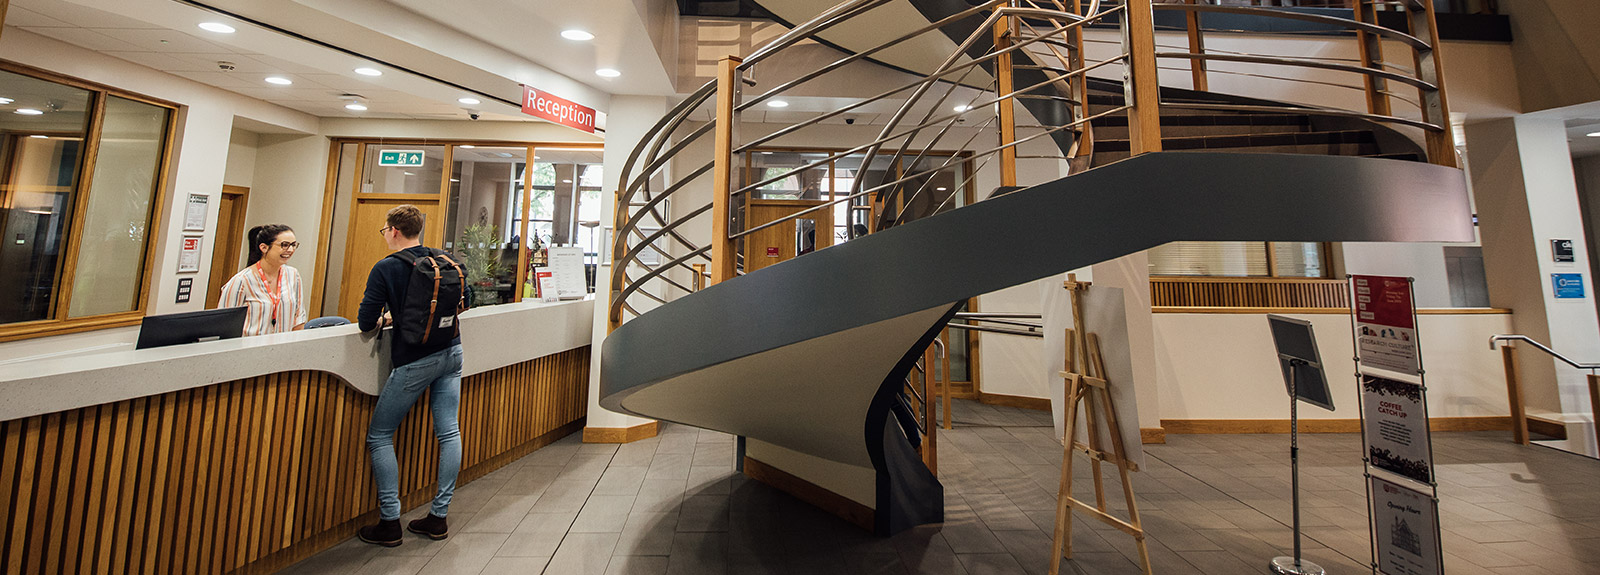 Graduate School reception desk and stairs